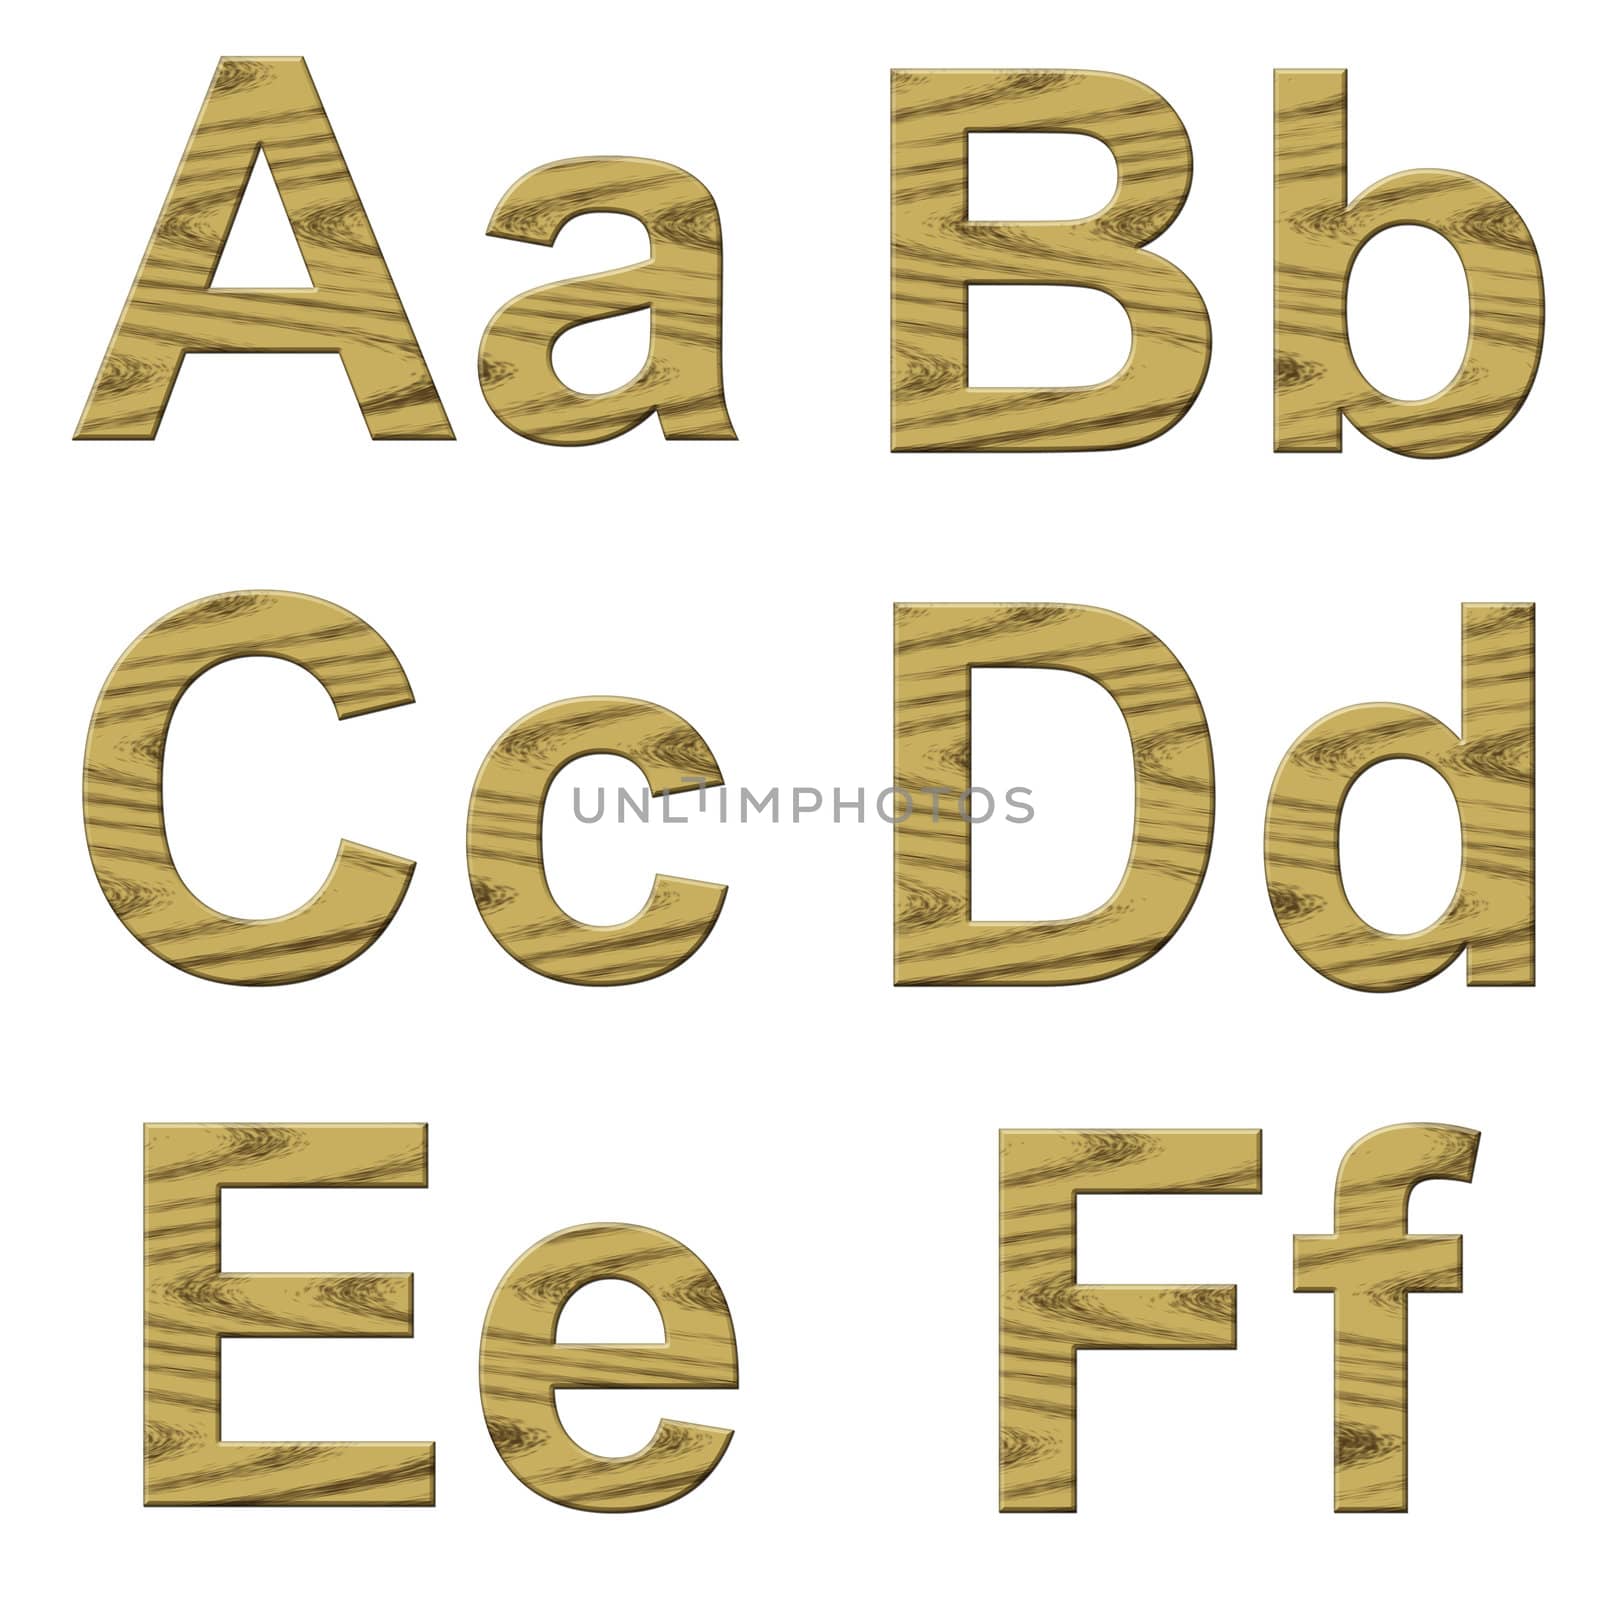 Illustration of wooden letters on white background.